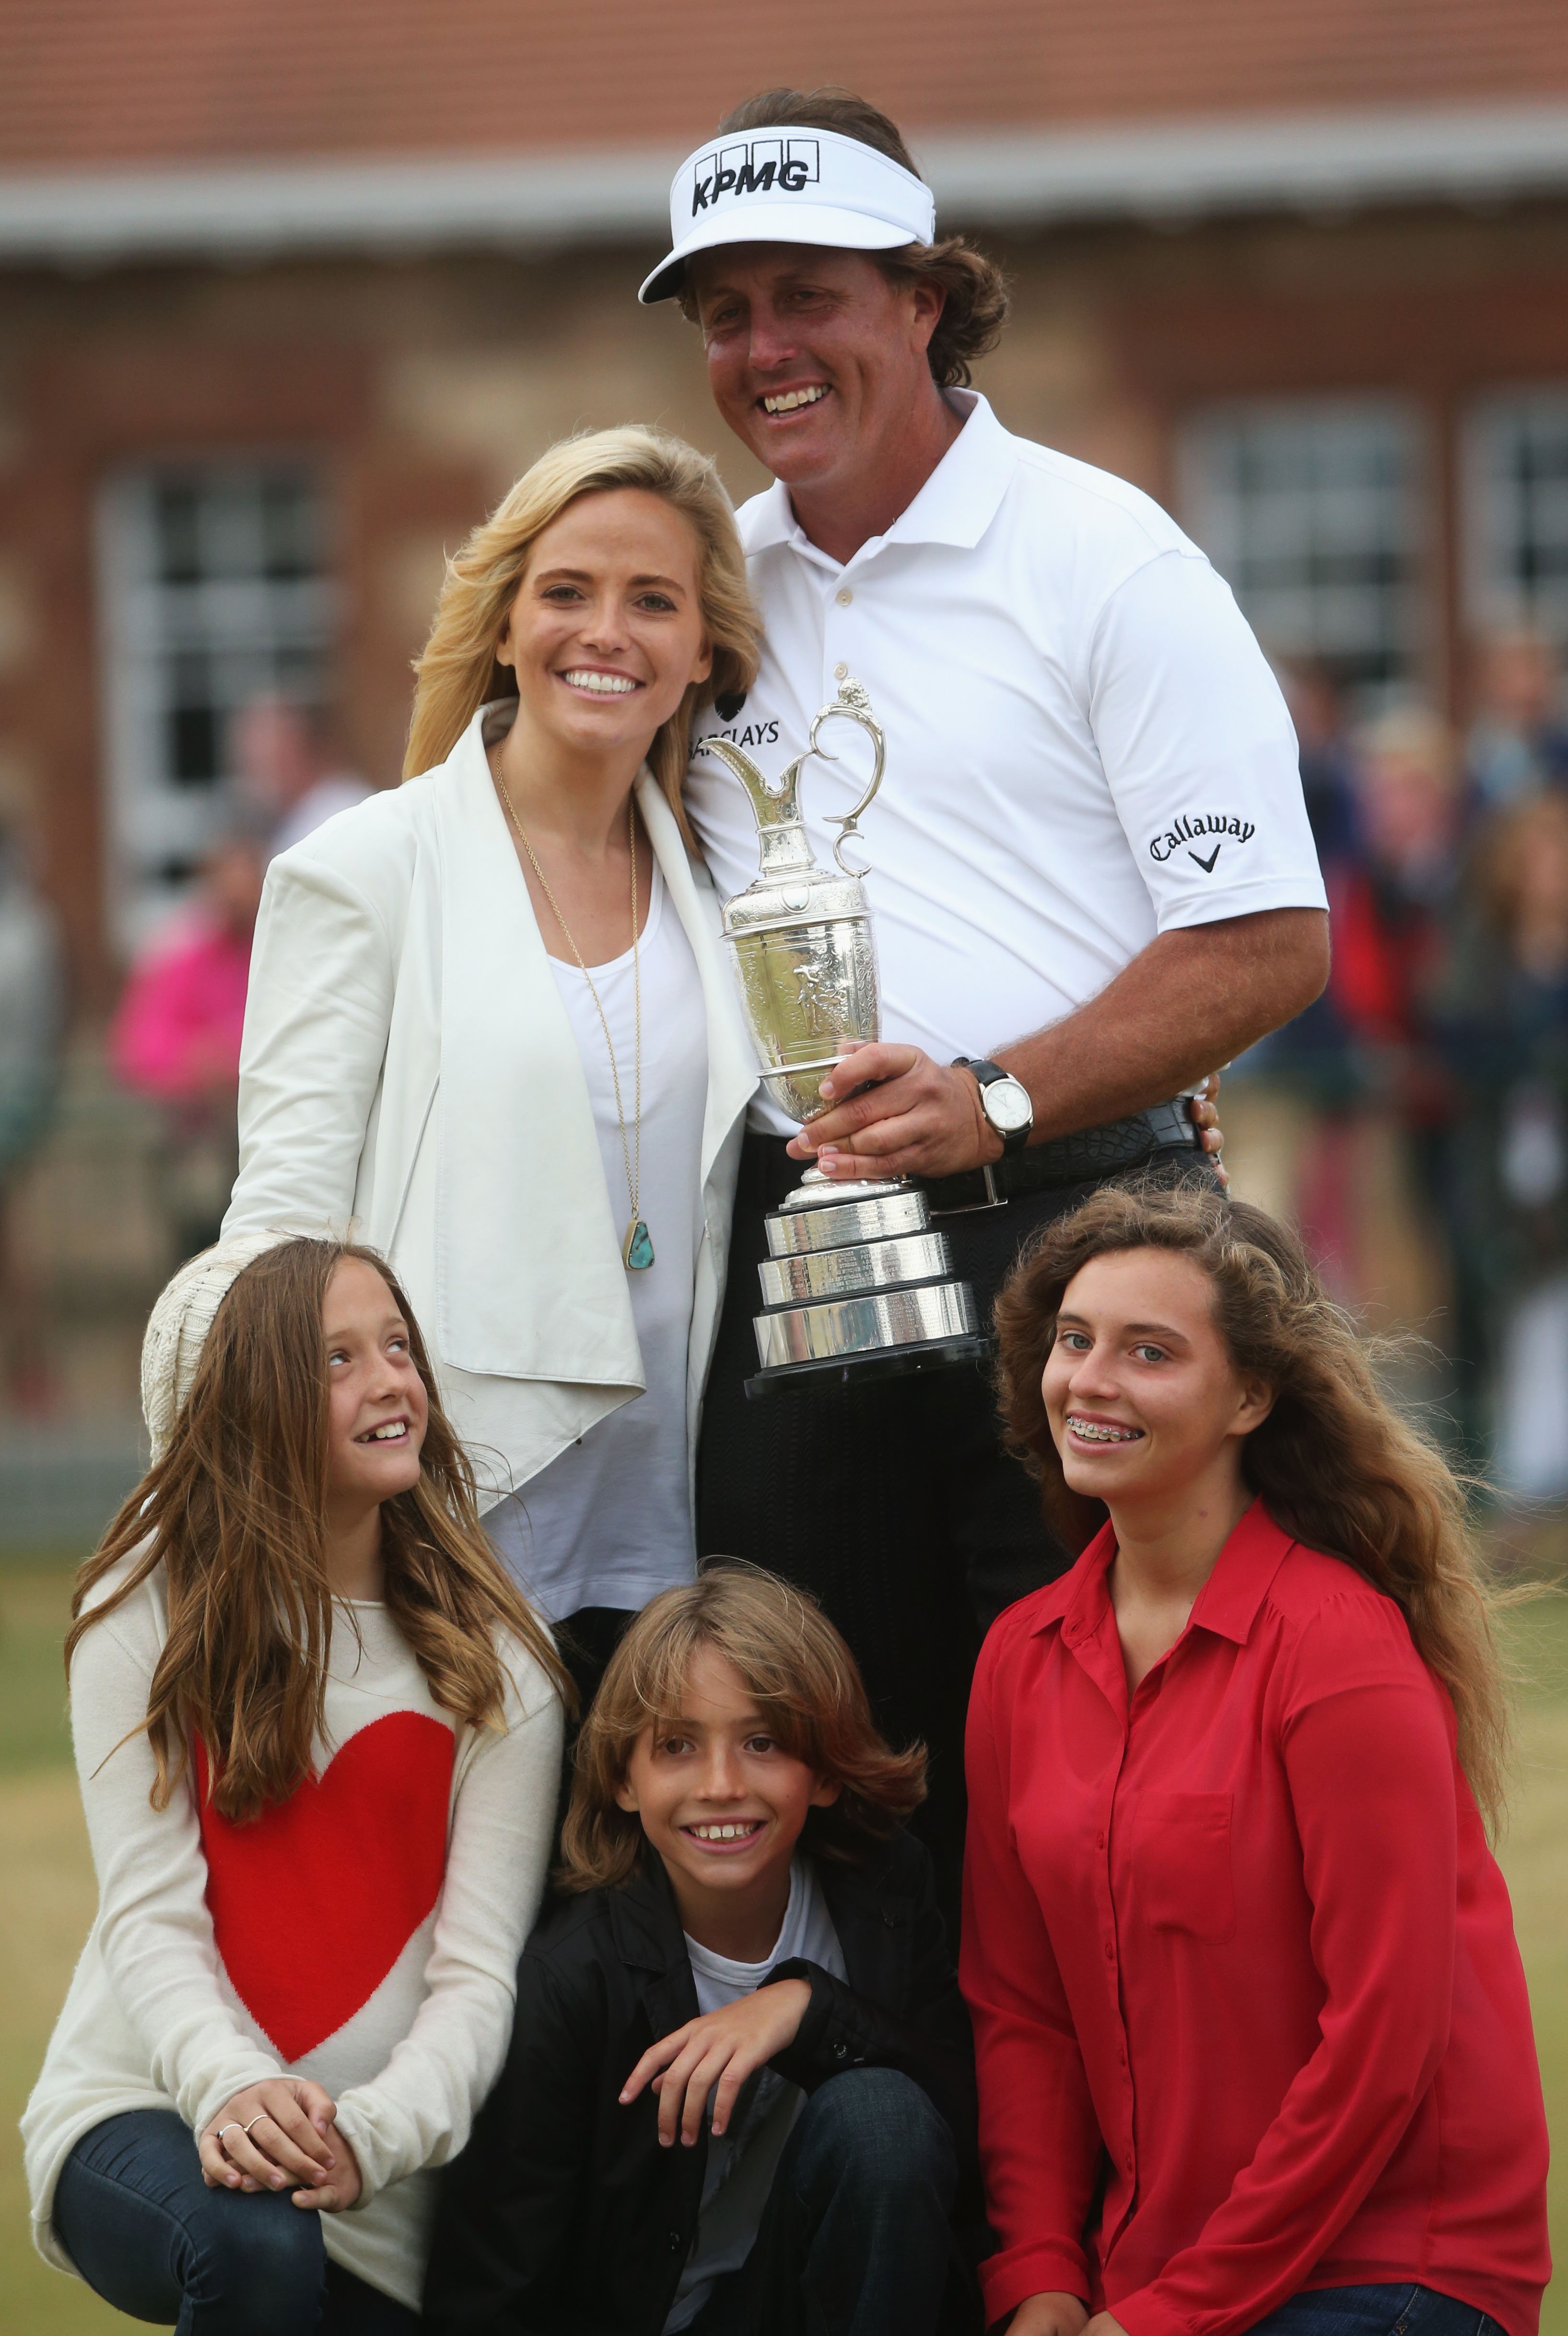 Phil Mickelson and Amy Mickelson with their children following Phil's win at the 142nd Open Championship on July 21, 2013, in Gullane, Scotland. | Source: Getty Images